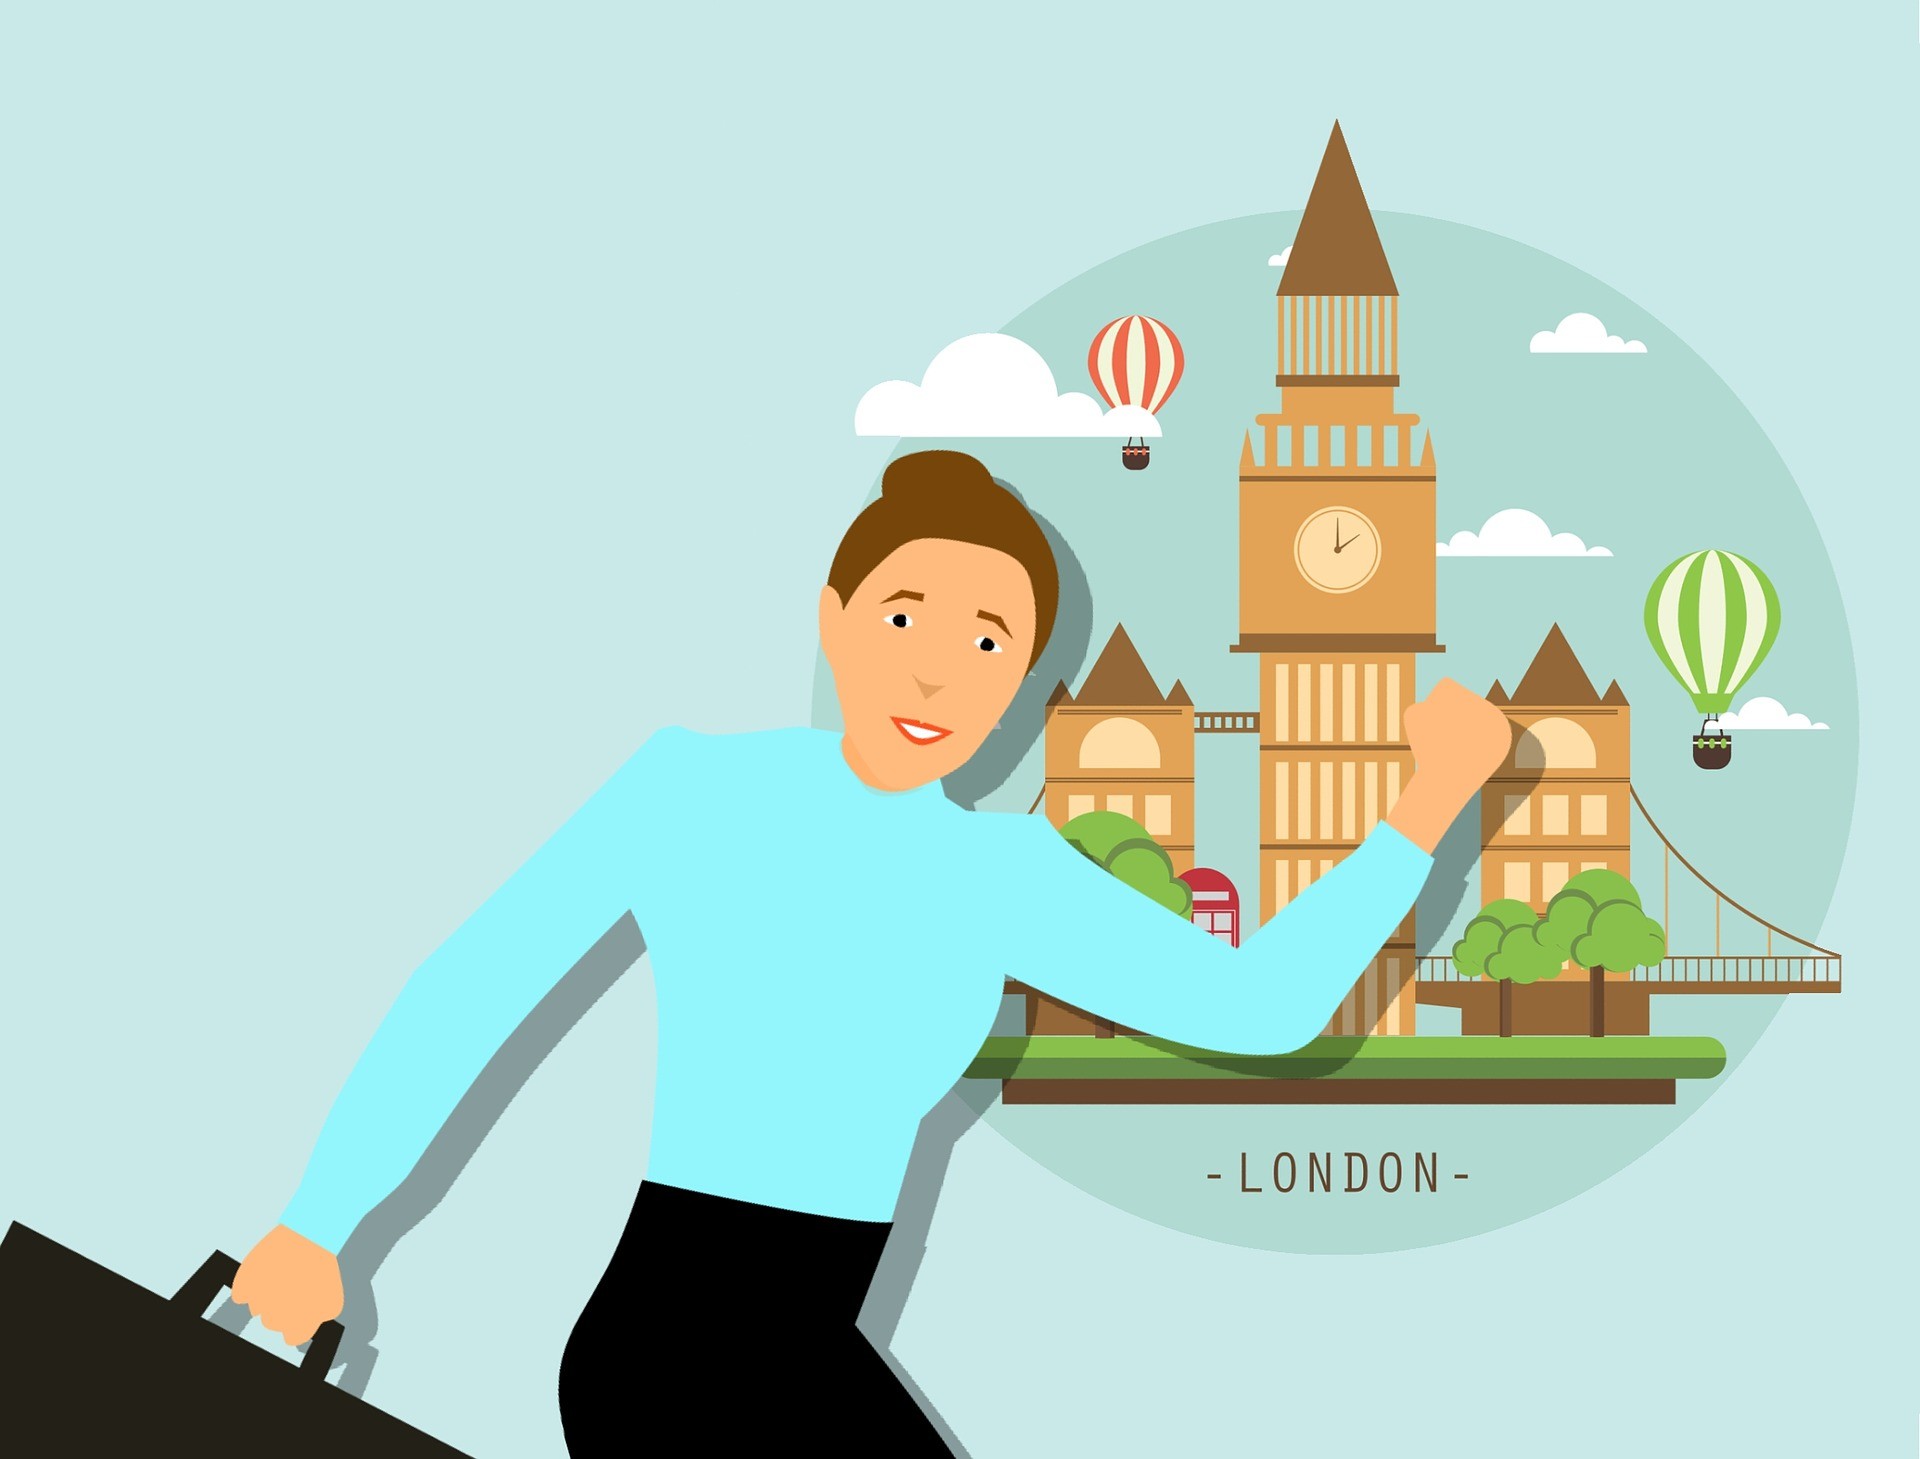 Female cartoon character with London picture in the background